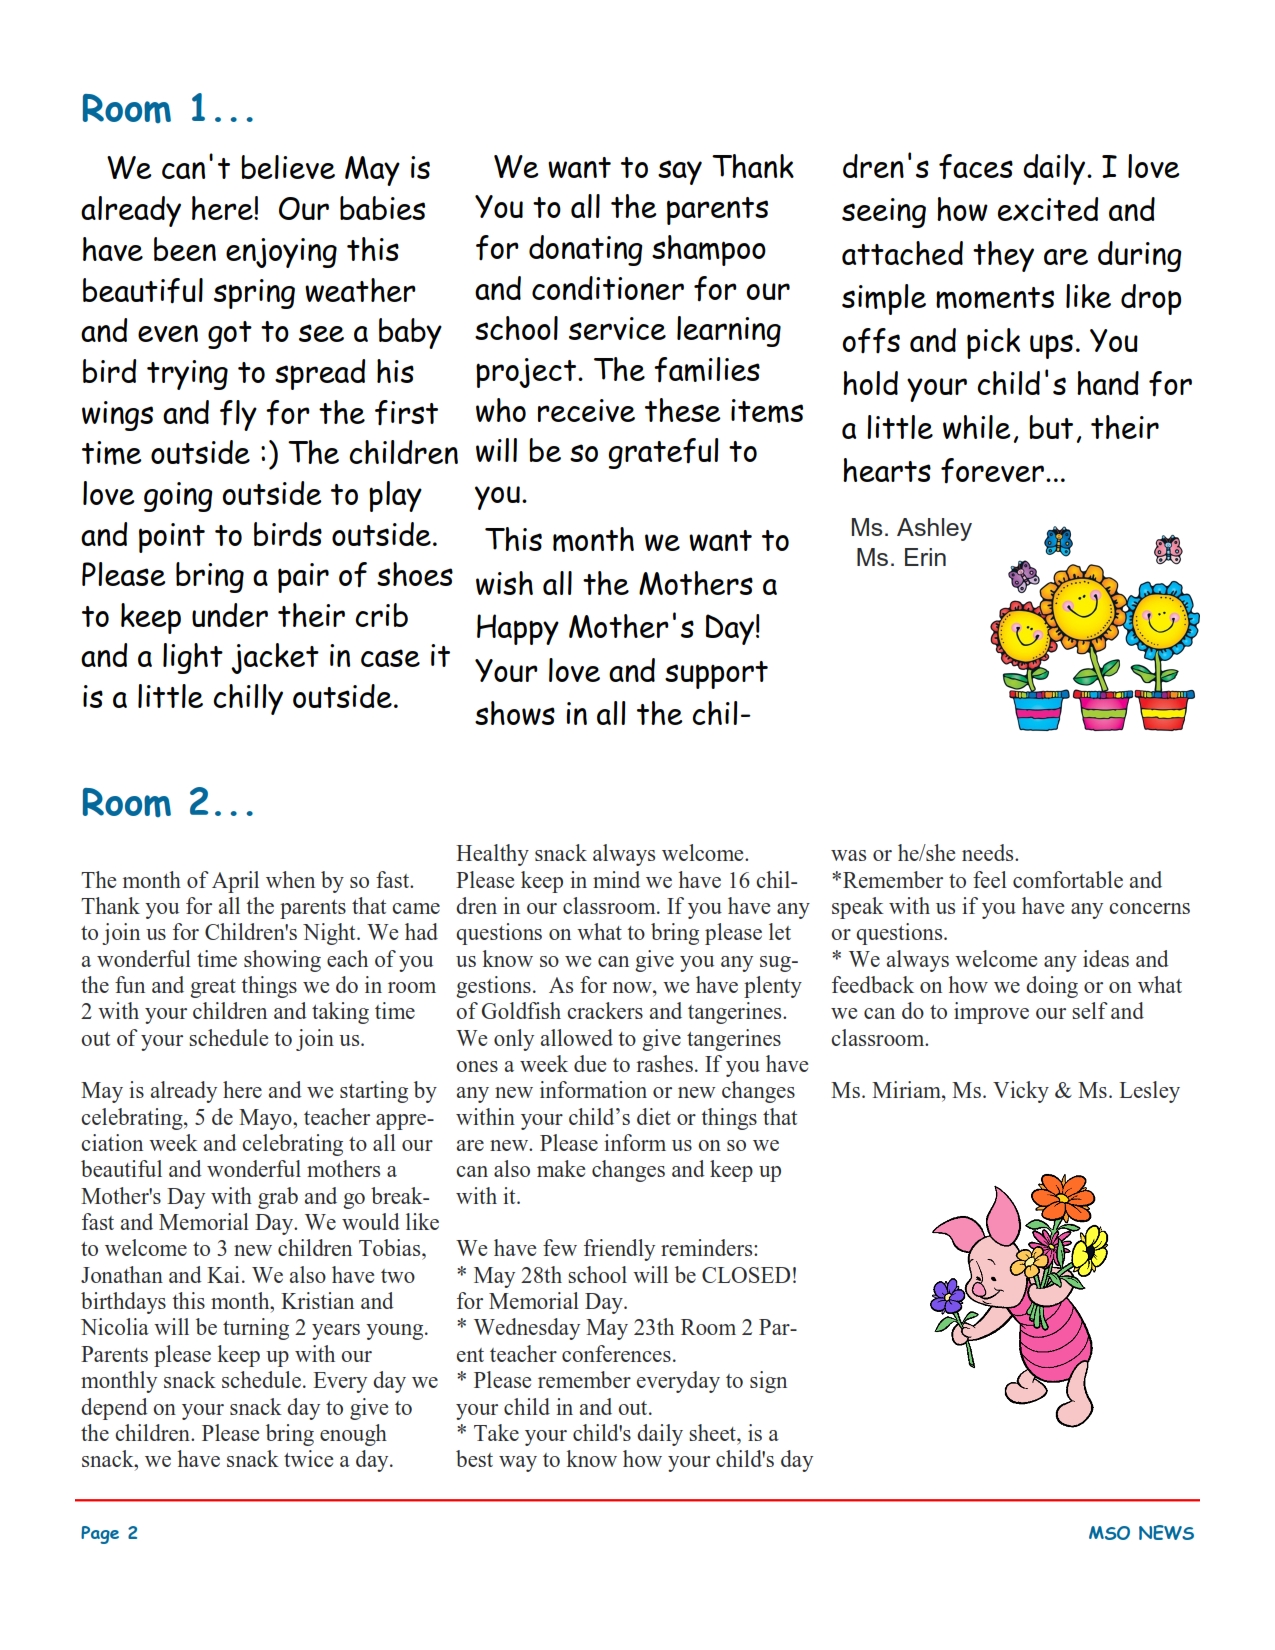 MSO May 2018 Newsletter. Room 1 and Room 2